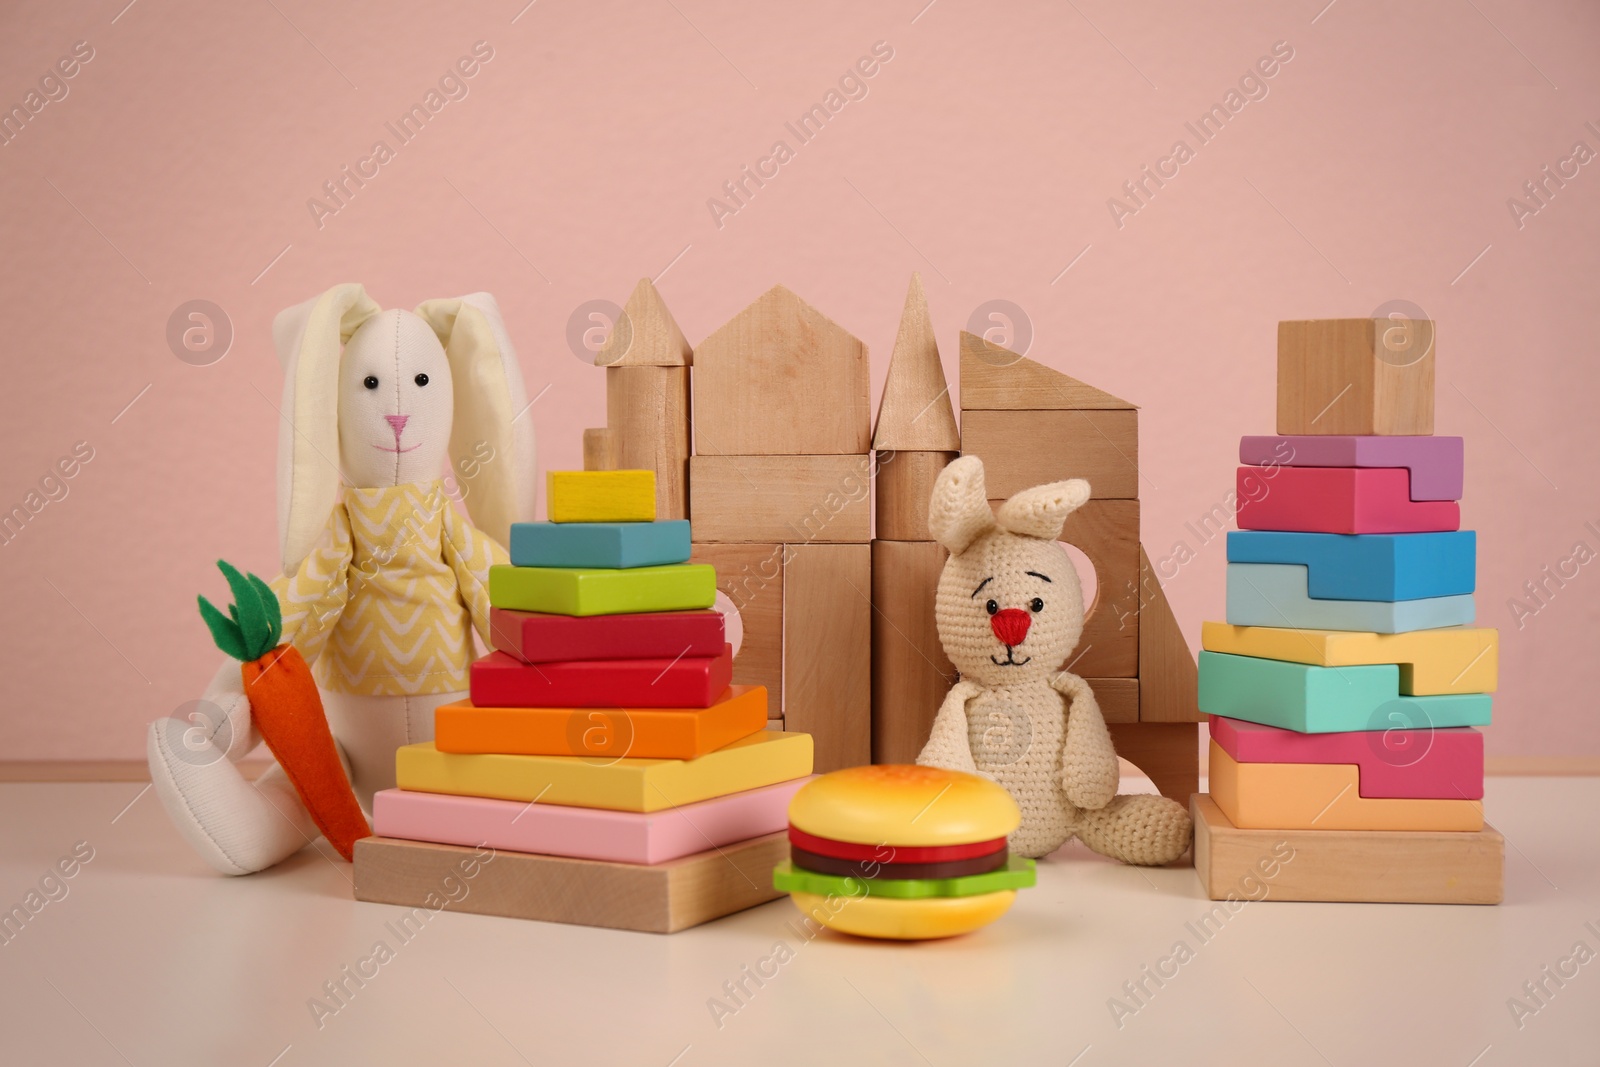 Photo of Set of different cute toys on wooden table against pink background